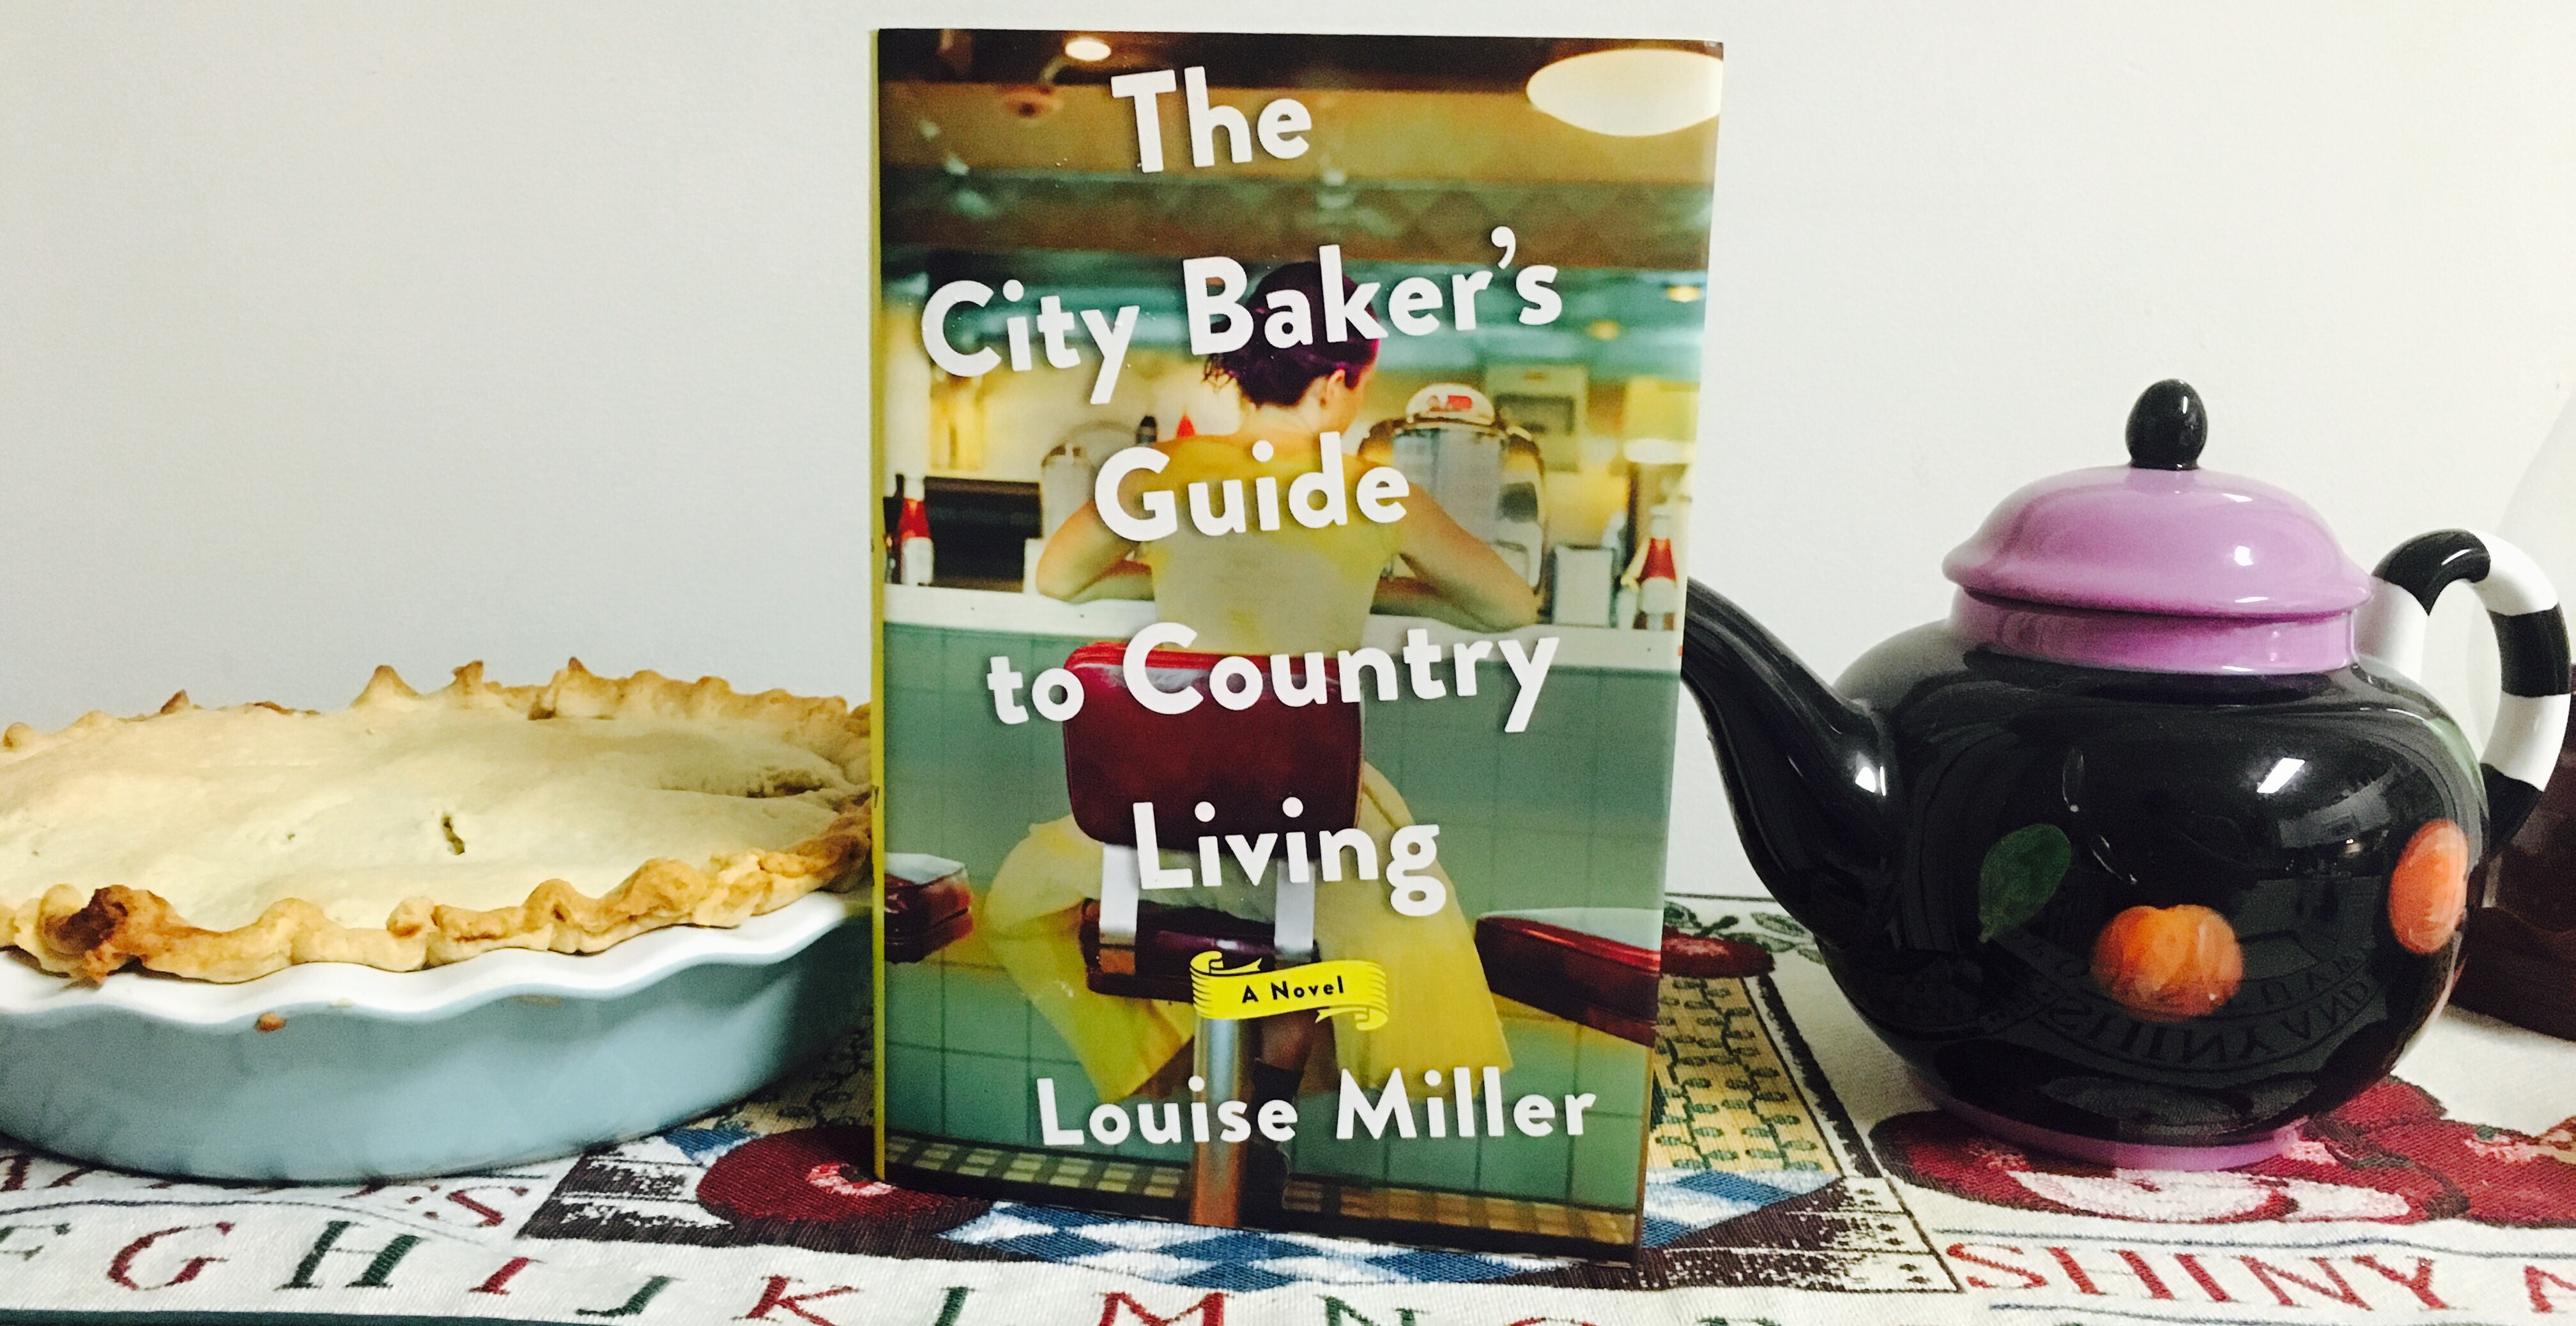 Emily on Instagram: The City Baker's Guide to Country Living by